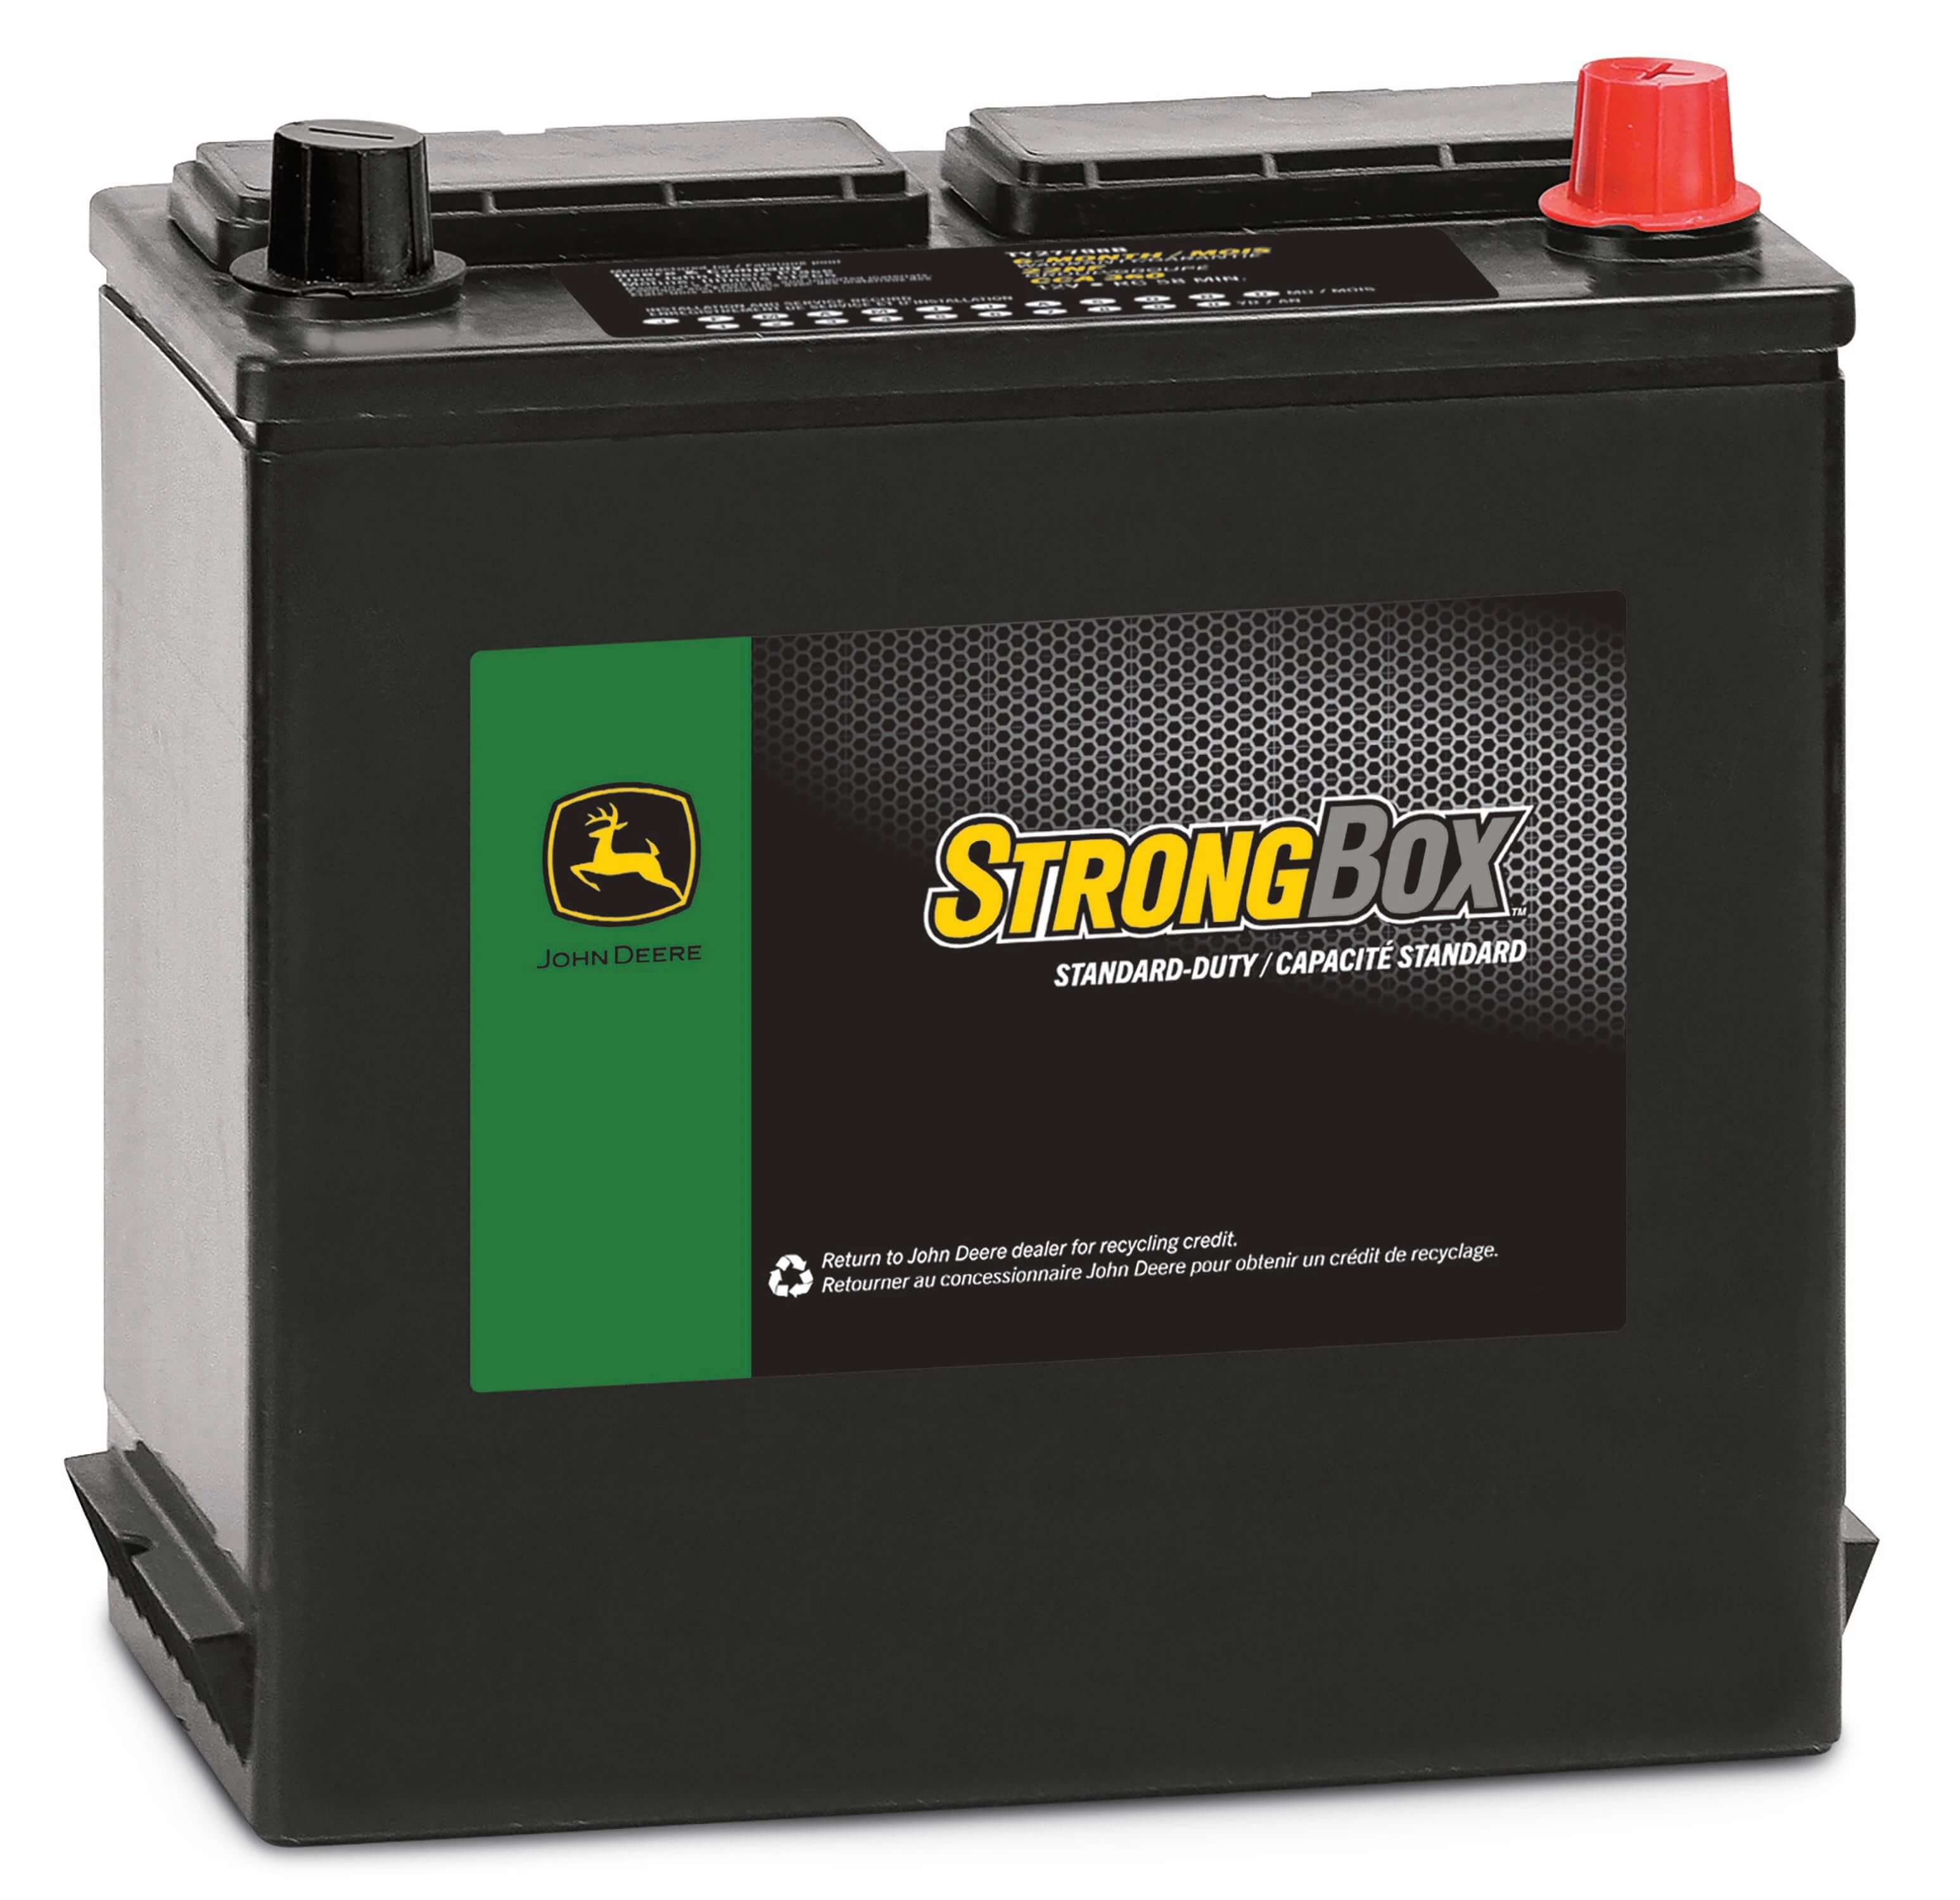 StrongBox Batteries - Wet Charged 12V - BCI 22 - TY27798B